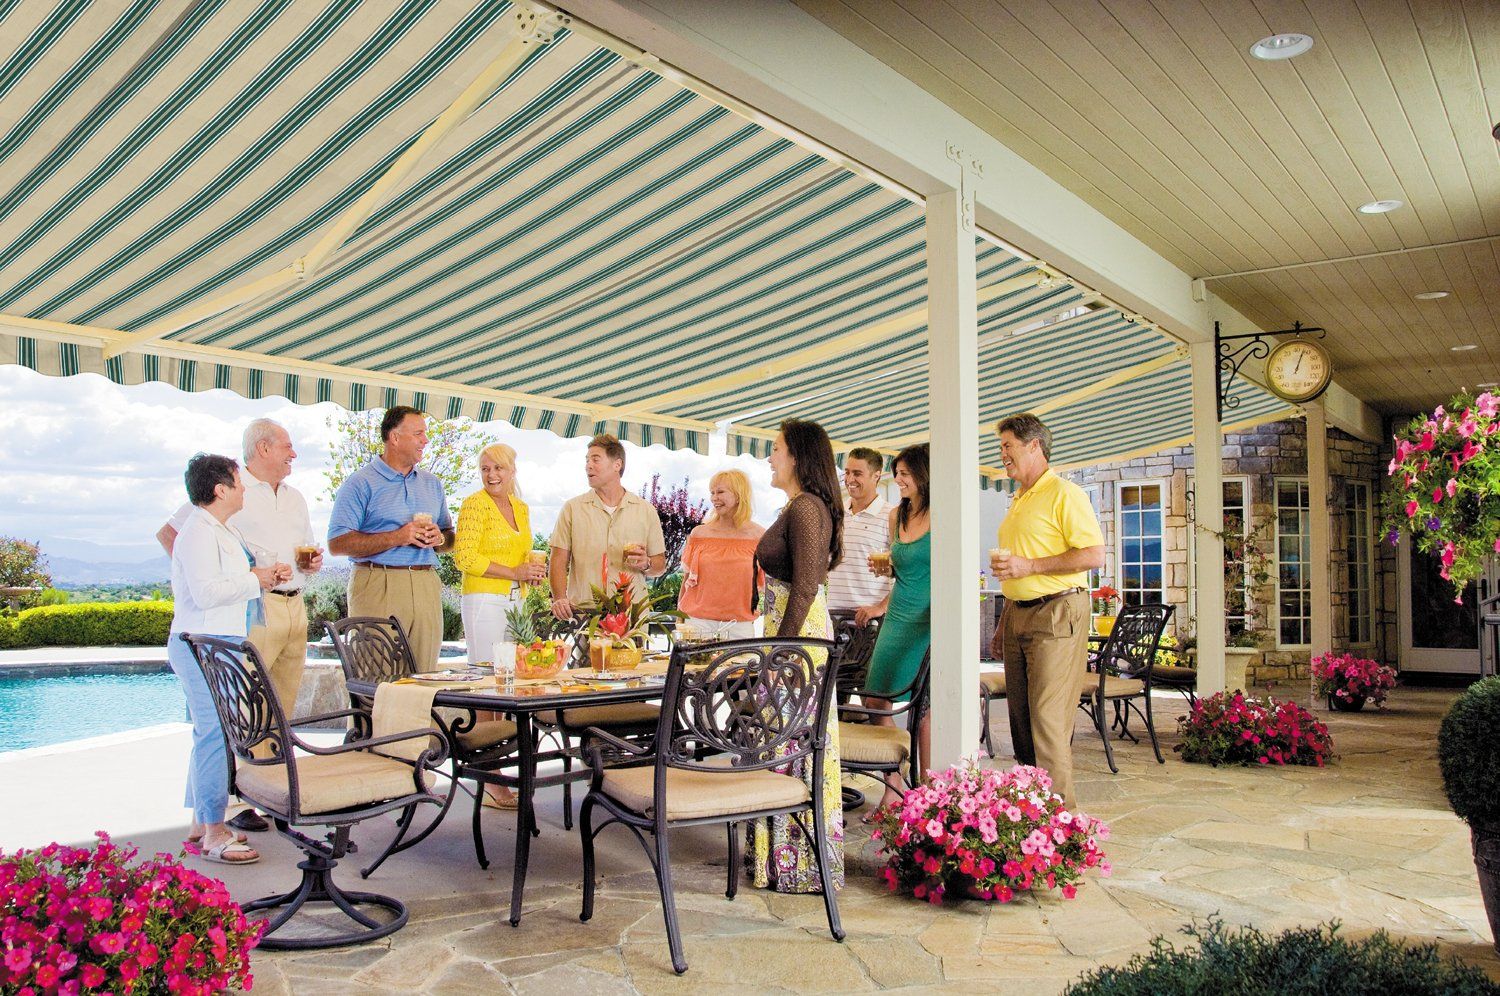 Sunsetter retractable awning dealer in central NY,   Sunsetter dealer in Syracuse, NY, Motorized awnings, best warranty, Awning installations